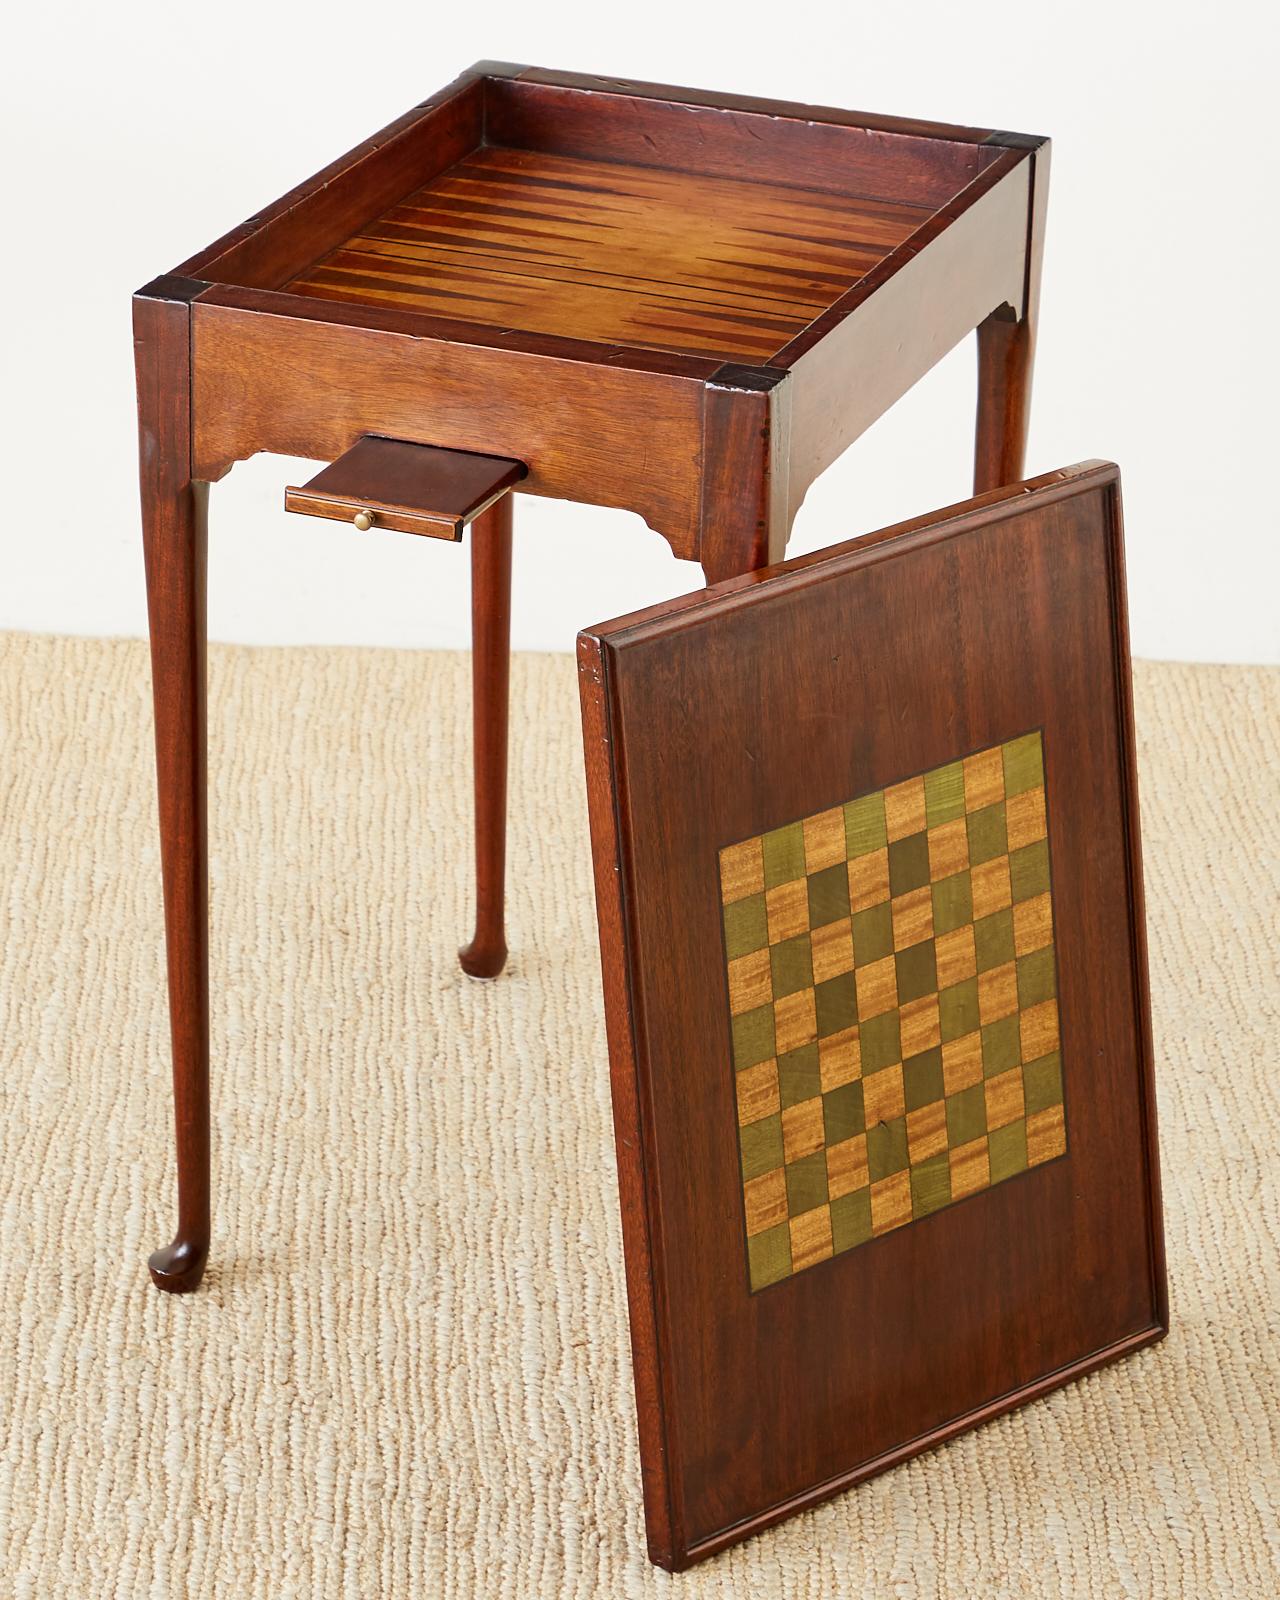 Painstaking reproduction of a 17th century Queen Anne style flip-top game table. Handcrafted from radiant grained mahogany with 1.5 inch thick boards on each end. The table features a flip-top that has a backgammon board on the inside made from